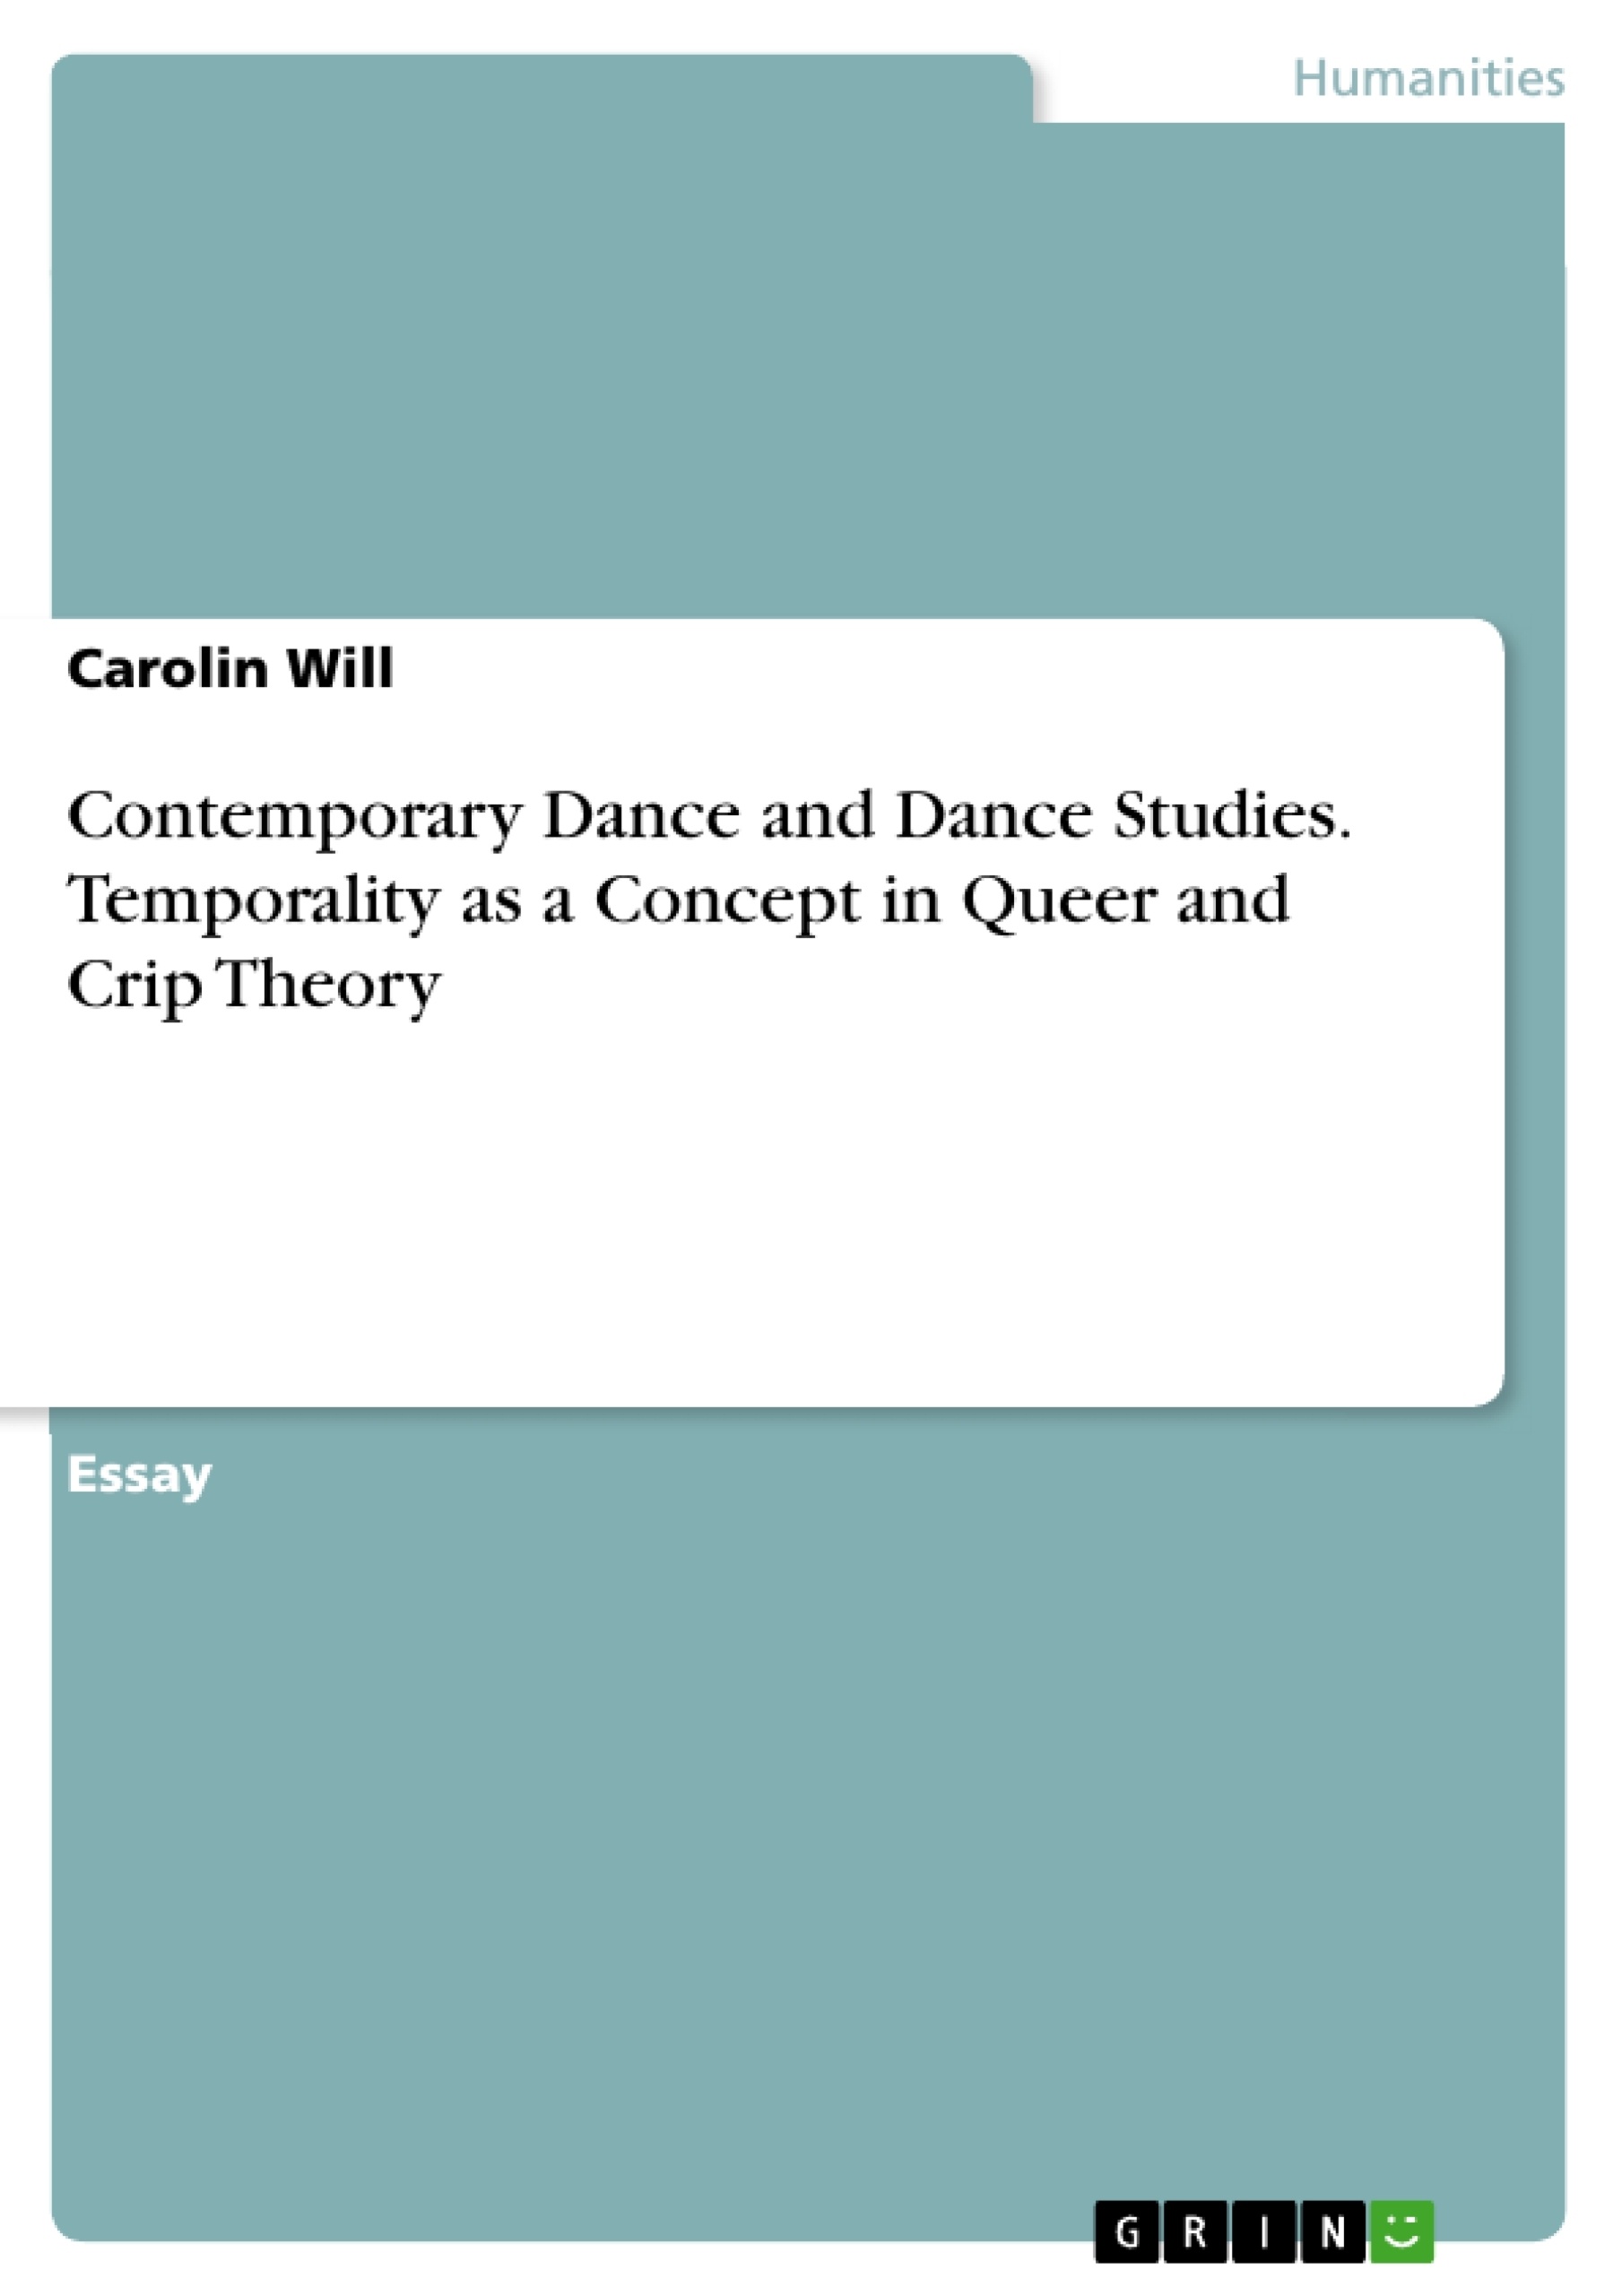 Titre: Contemporary Dance and Dance Studies. Temporality as a Concept in Queer and Crip Theory